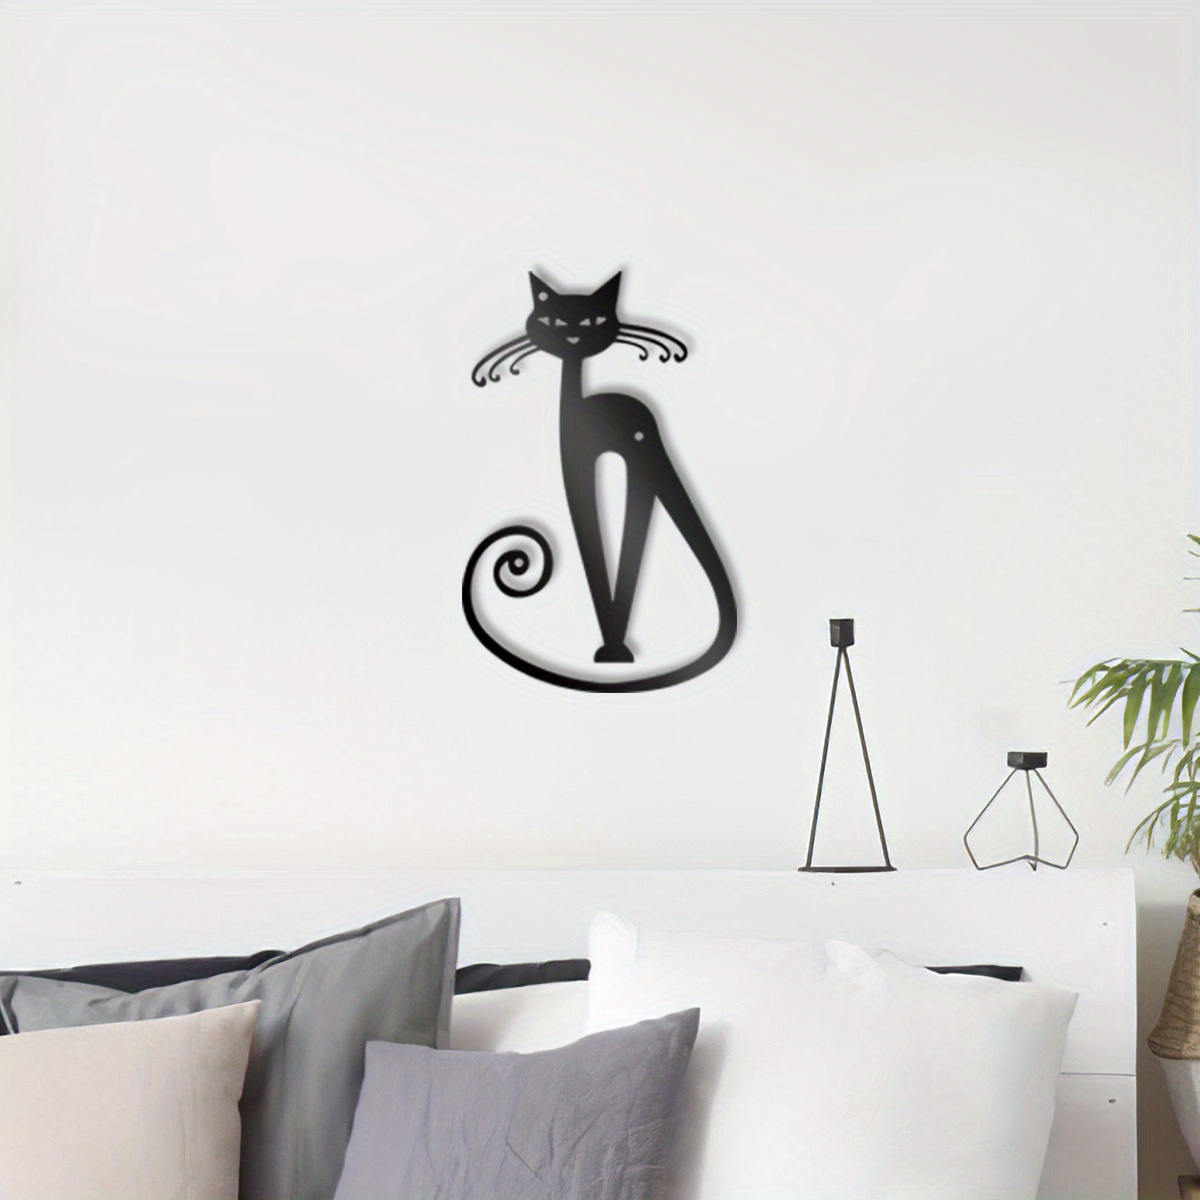 

Iron Cat Silhouette Metal Wall Art Decor - 1pc Cat Metal Yard Art For Cat Lovers - Perfect Above Bed Decor And Gift For Cat Person - Black Cat Wall Hanging